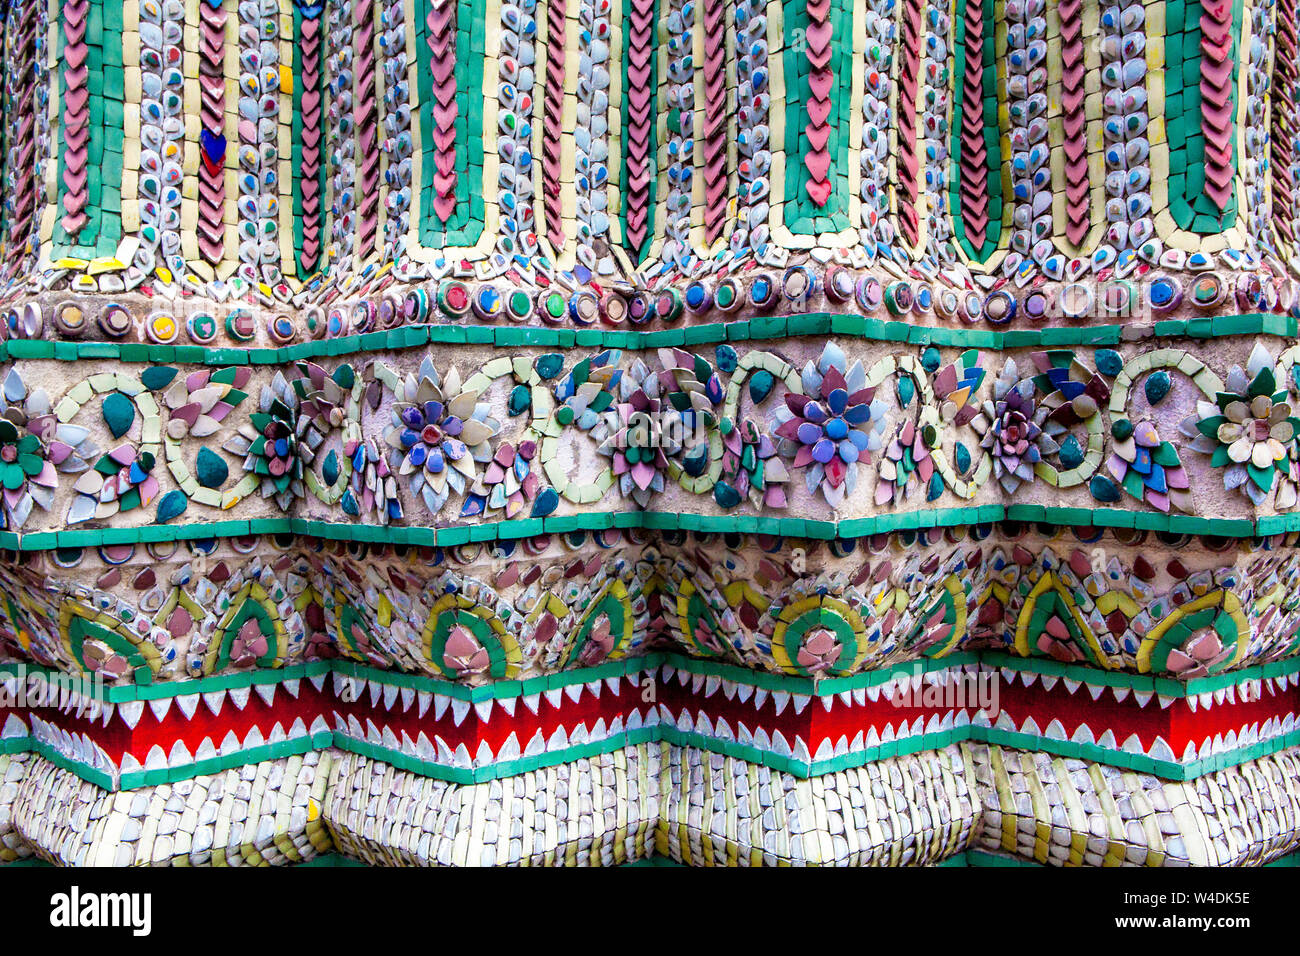 Intricate inlaid glass mosaic designs at the Grand Palace in Bangkok, Thailand. Stock Photo